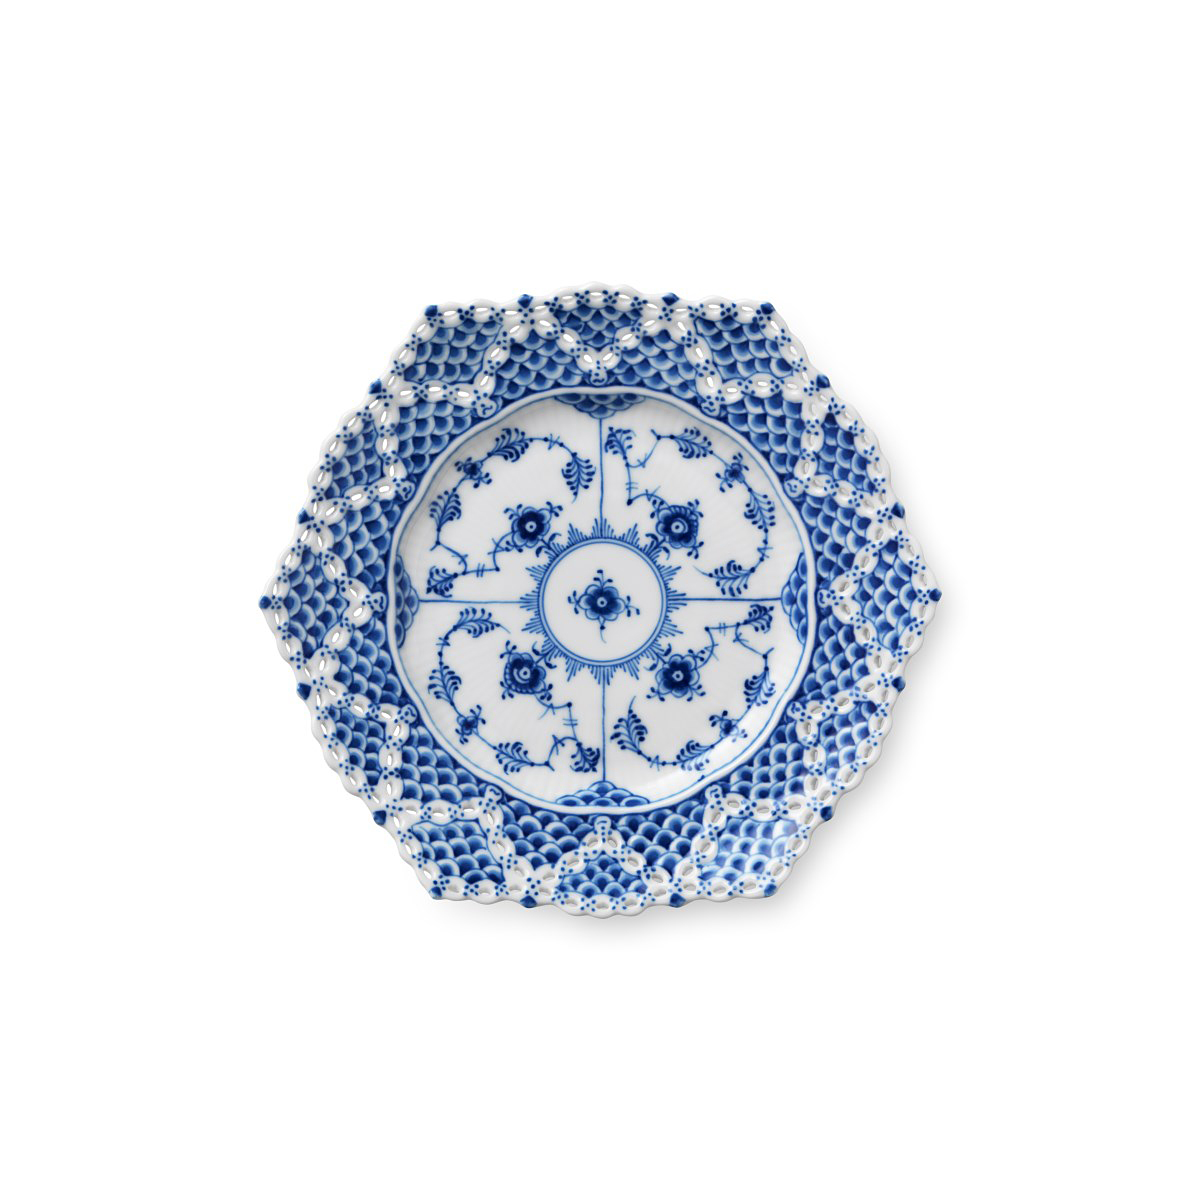 Royal Copenhagen, Blue Fluted Full Lace Cake Plate 8.25" W/ Double Lace Border